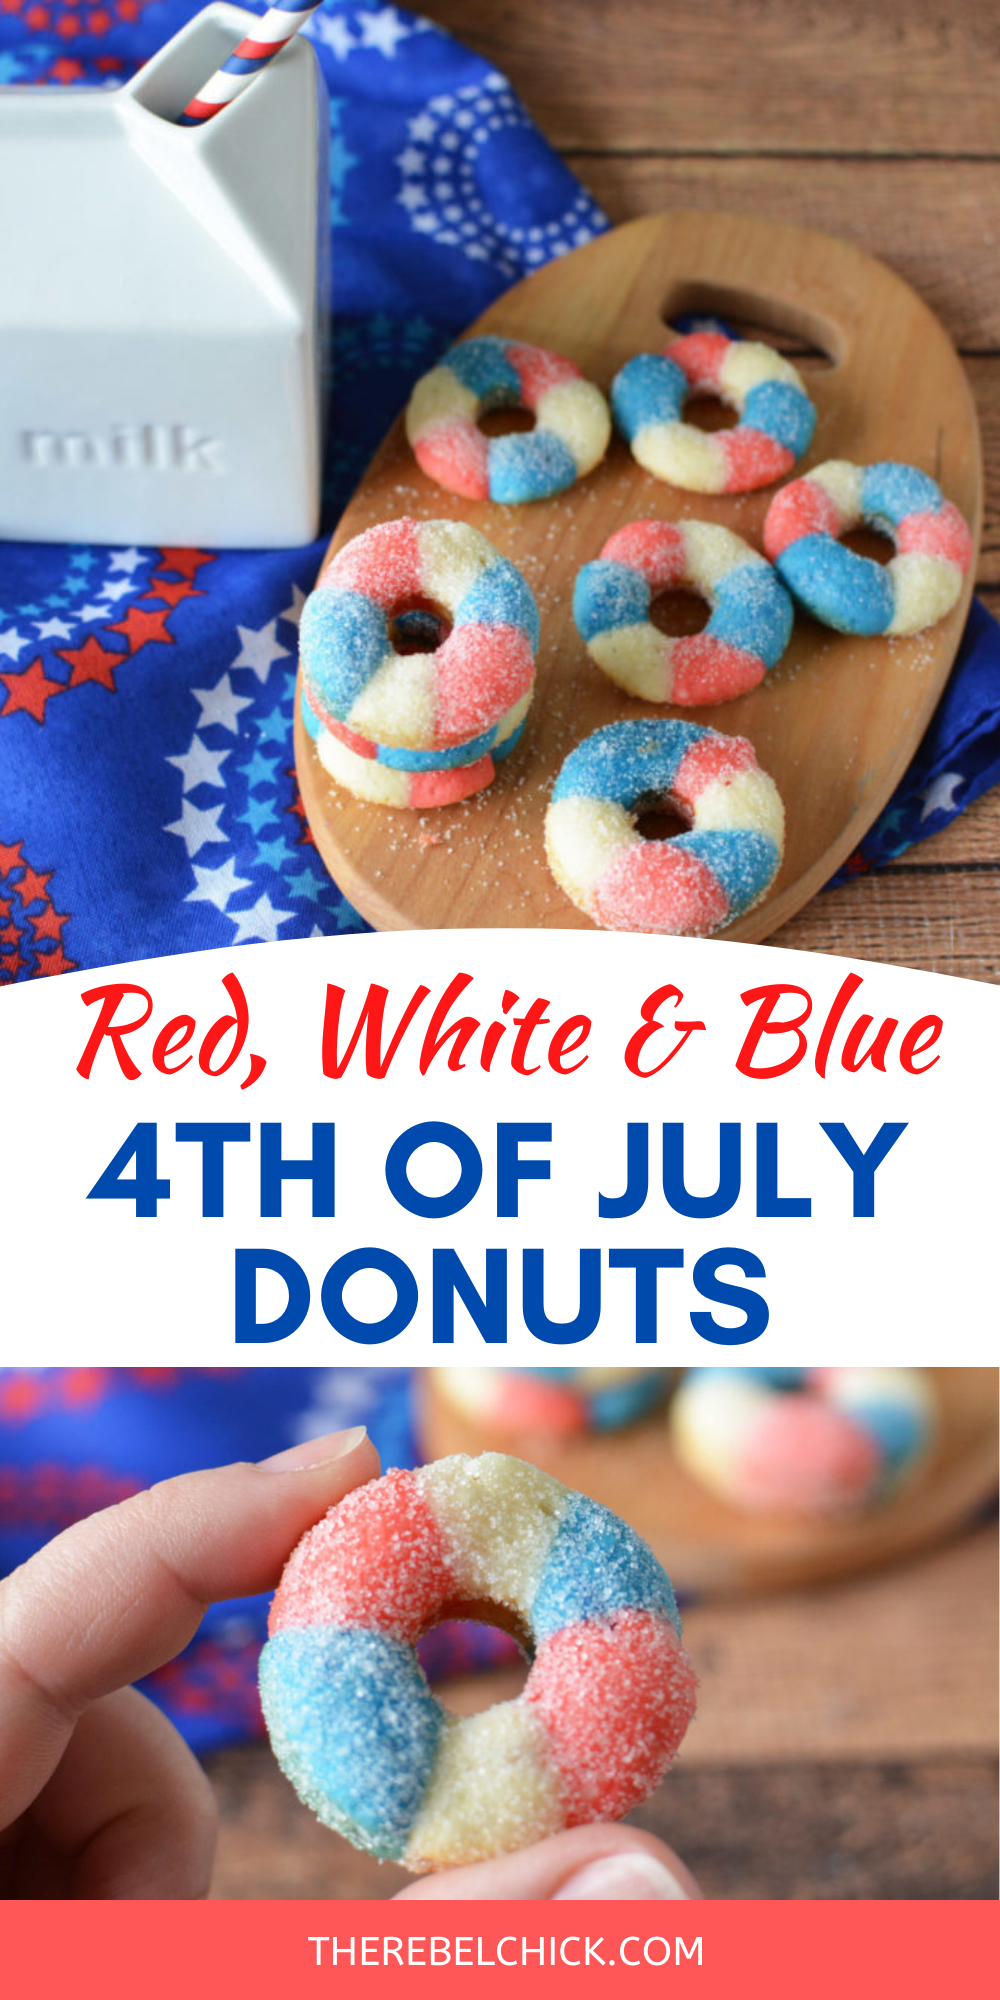 Red White and Blue Donuts 